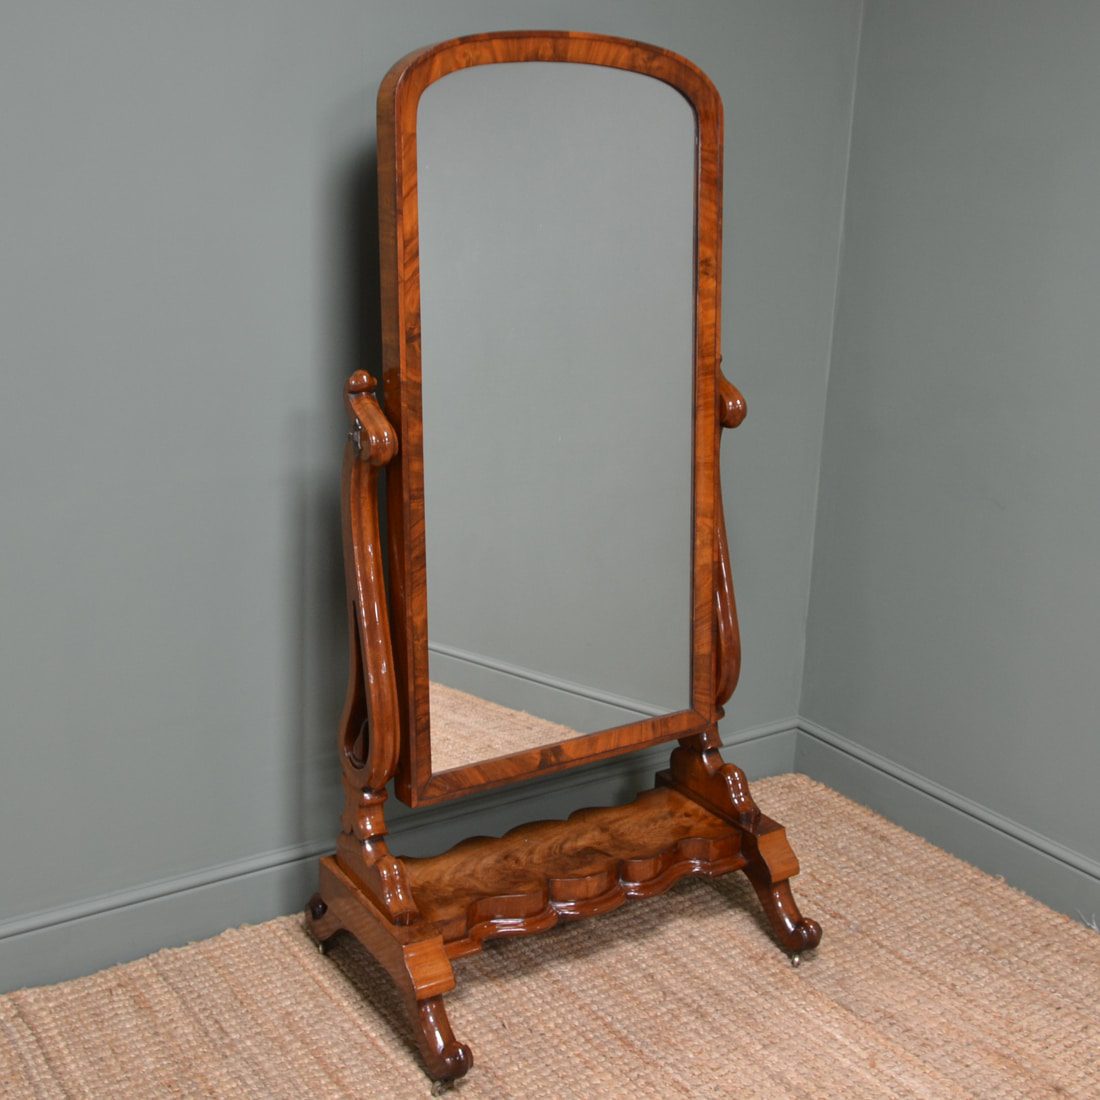 Antique Cheval Mirrors Antiques World, Small Vintage Standing Mirror